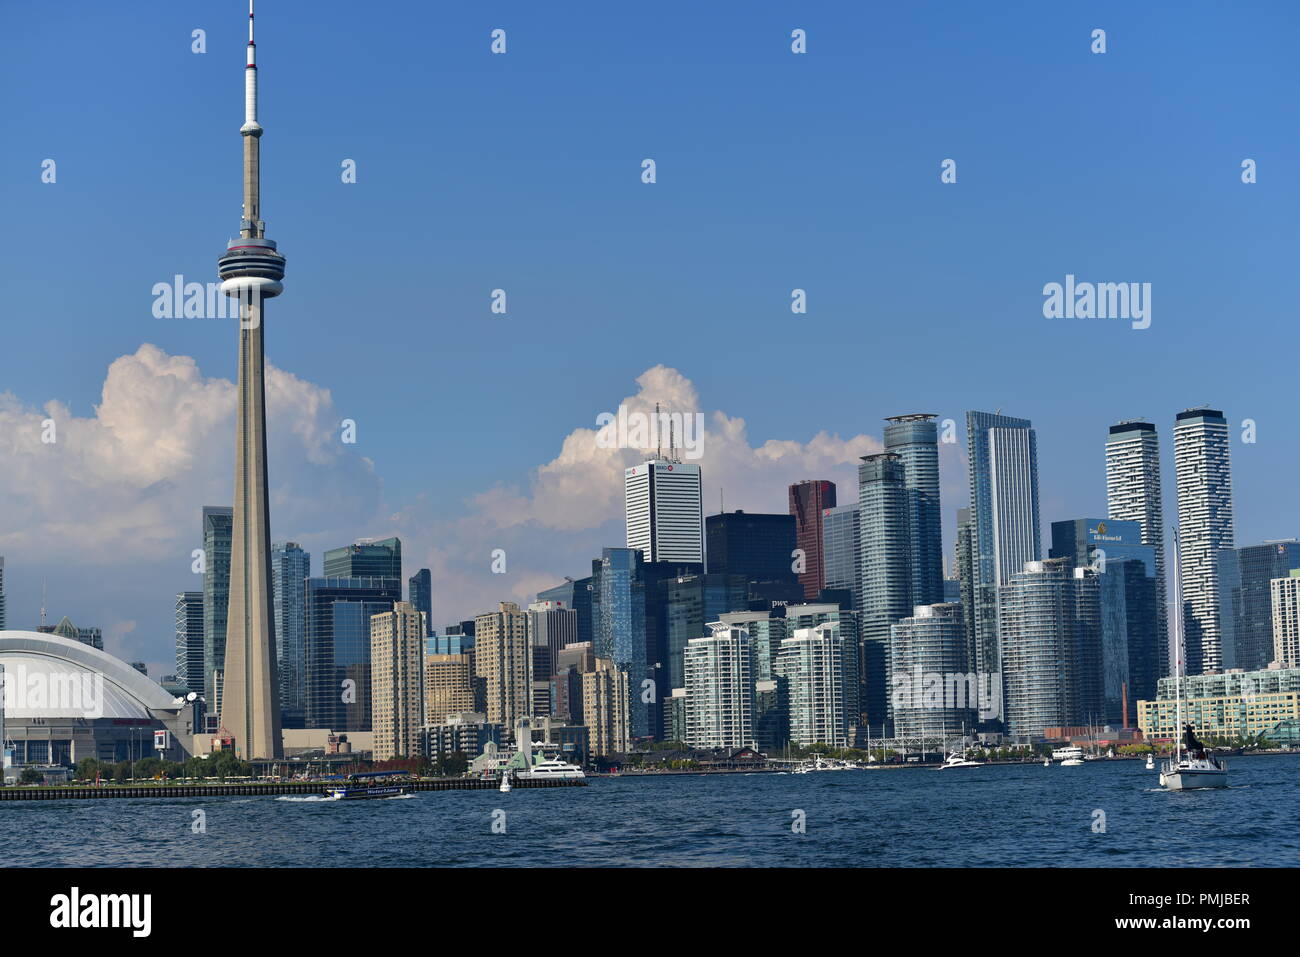 Toronto Downtown skyline featuring the famous CN Tower, as shot from the boat on Lake Ontario. Stock Photo